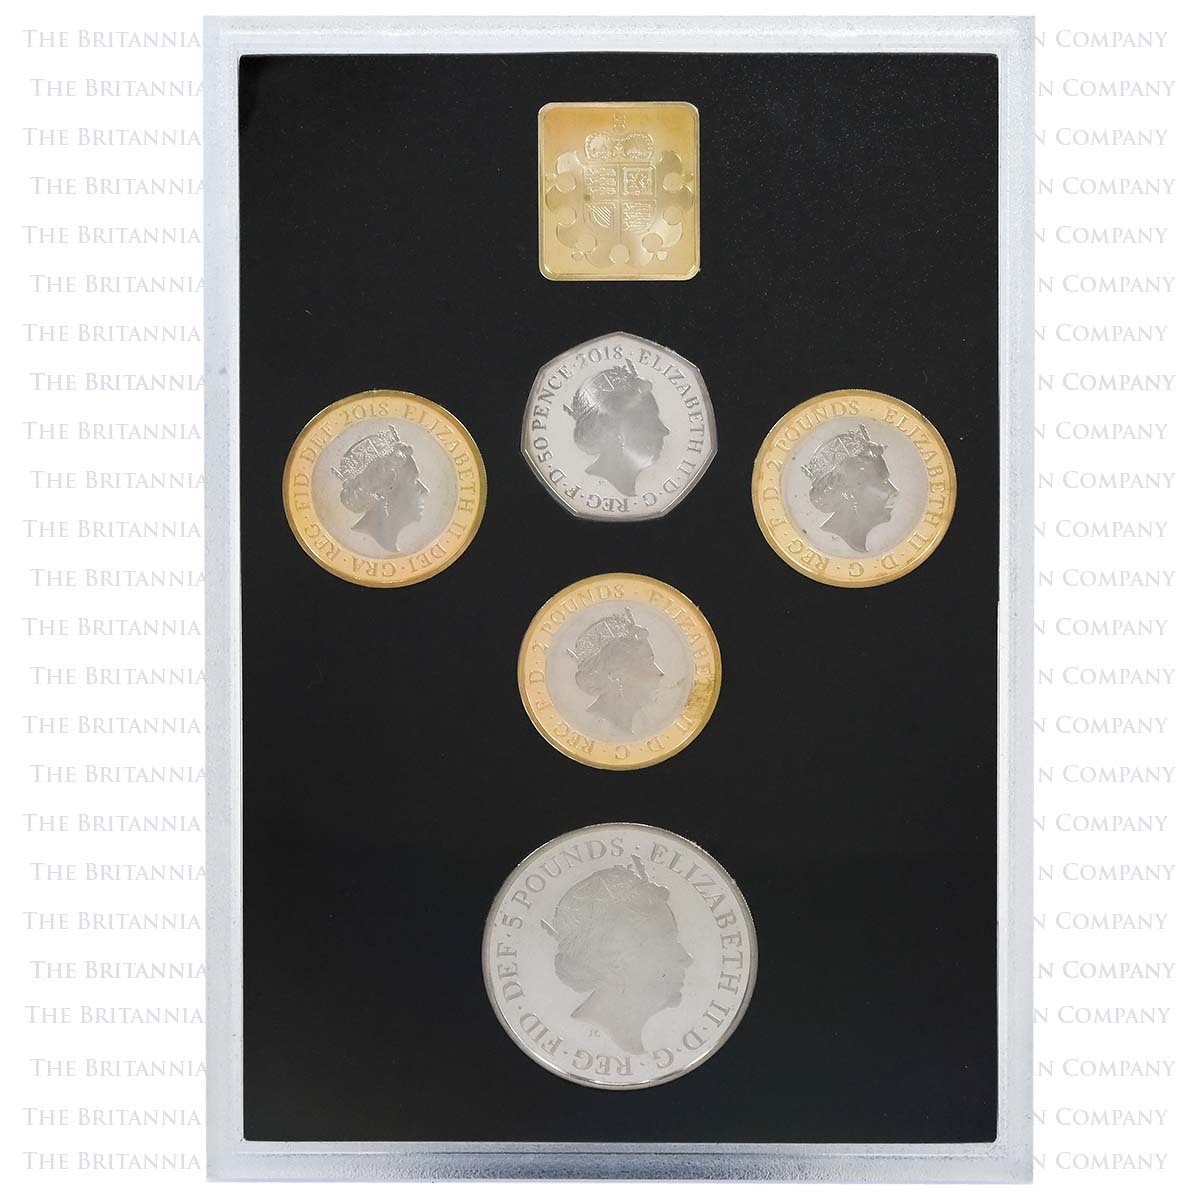 2018-proof-coin-set-collector-edtition-005-m